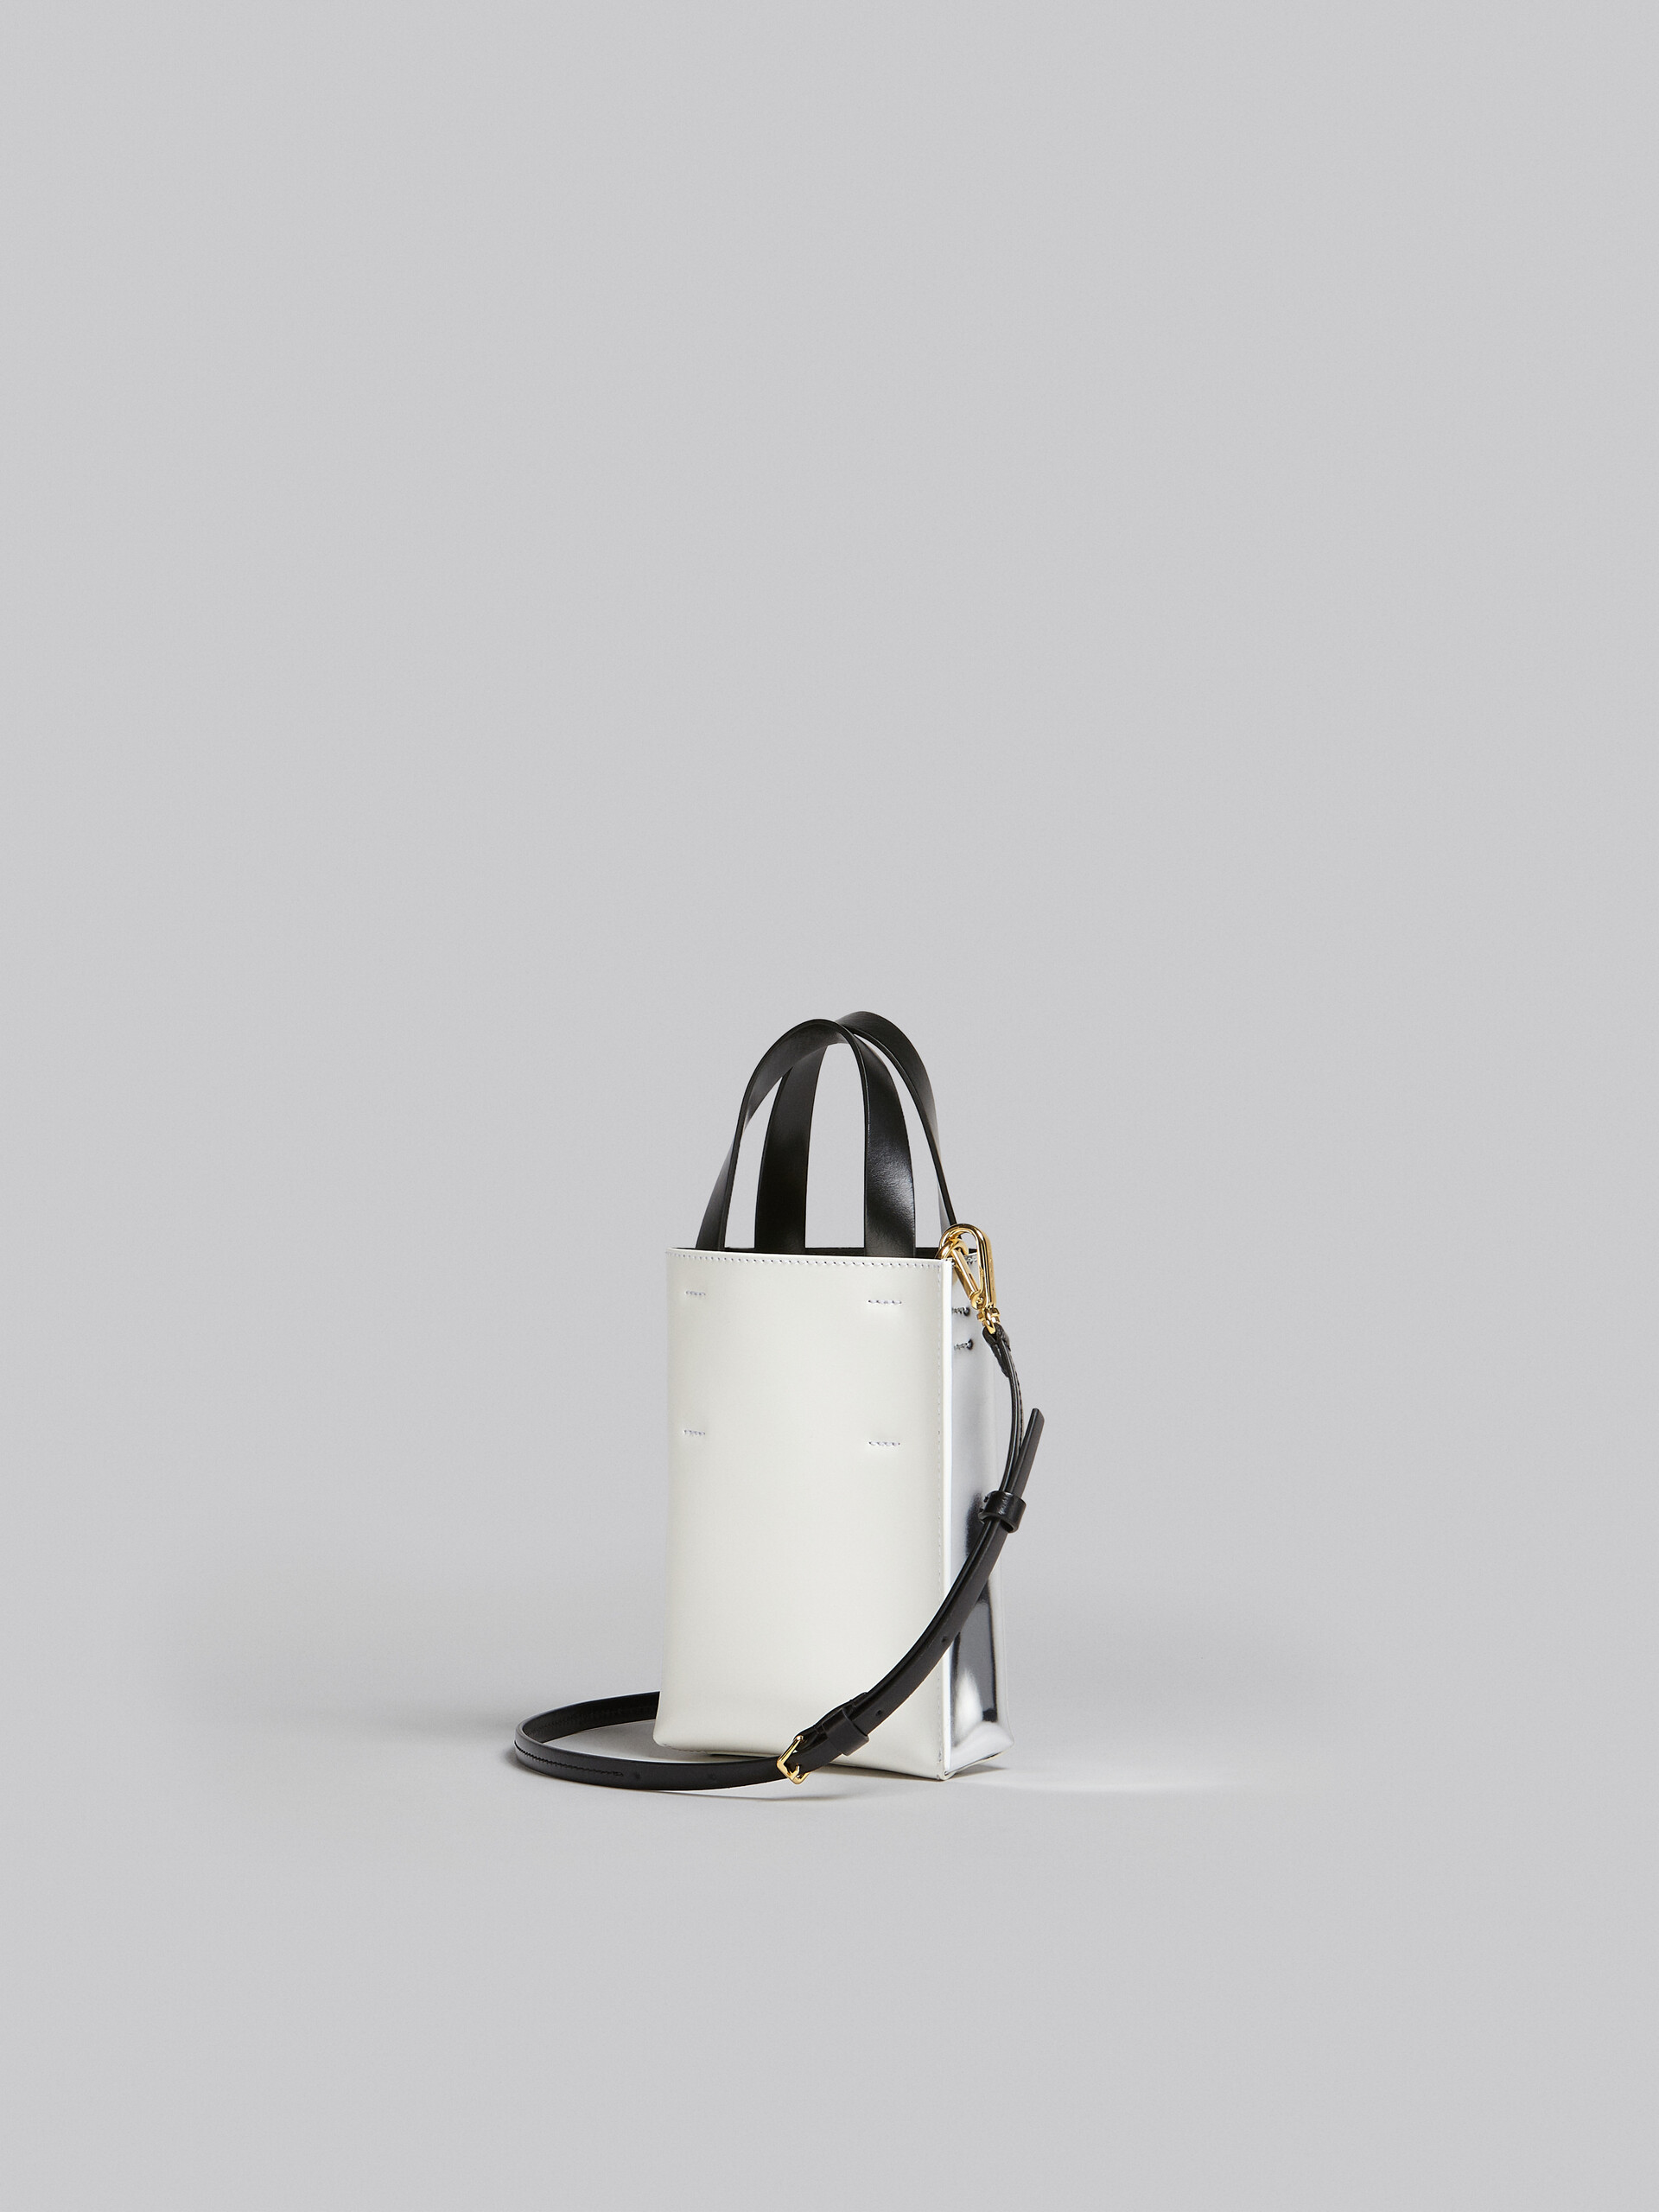 Museo Nano Bag in silver mirrored leather - Shopping Bags - Image 3